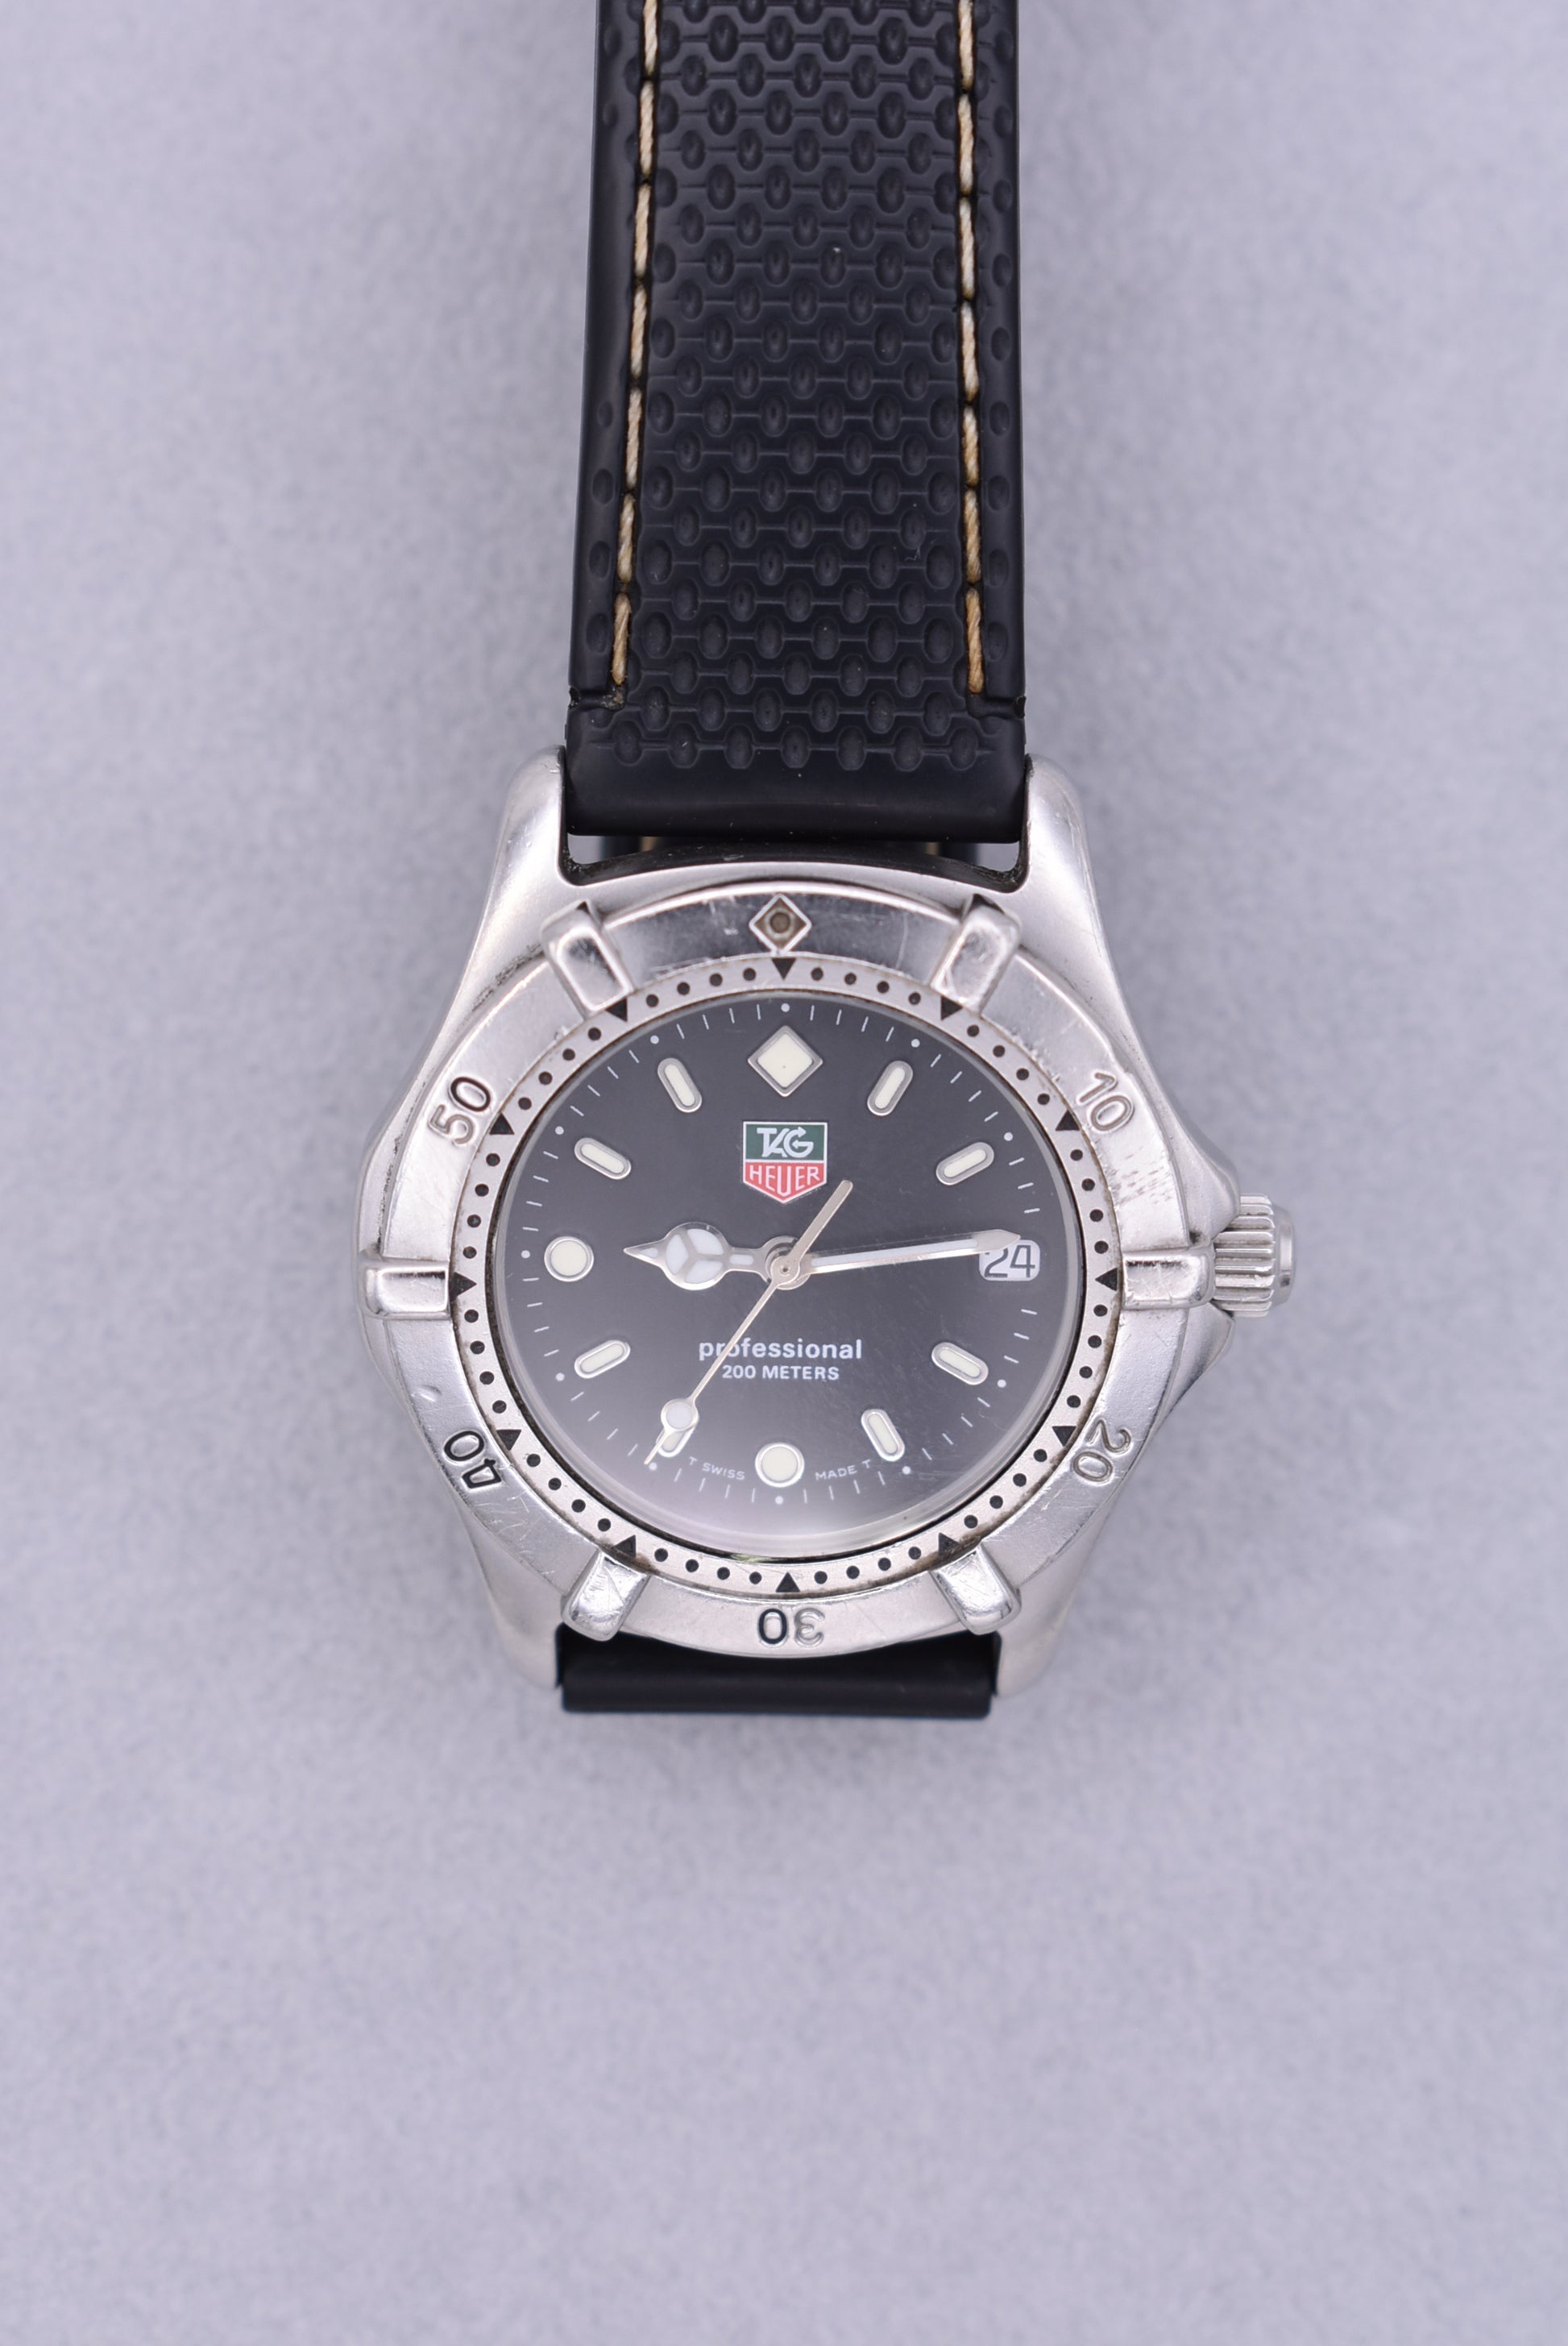 TAG Heuer Vintage Diver 200 Meters Professional for $1,445 for